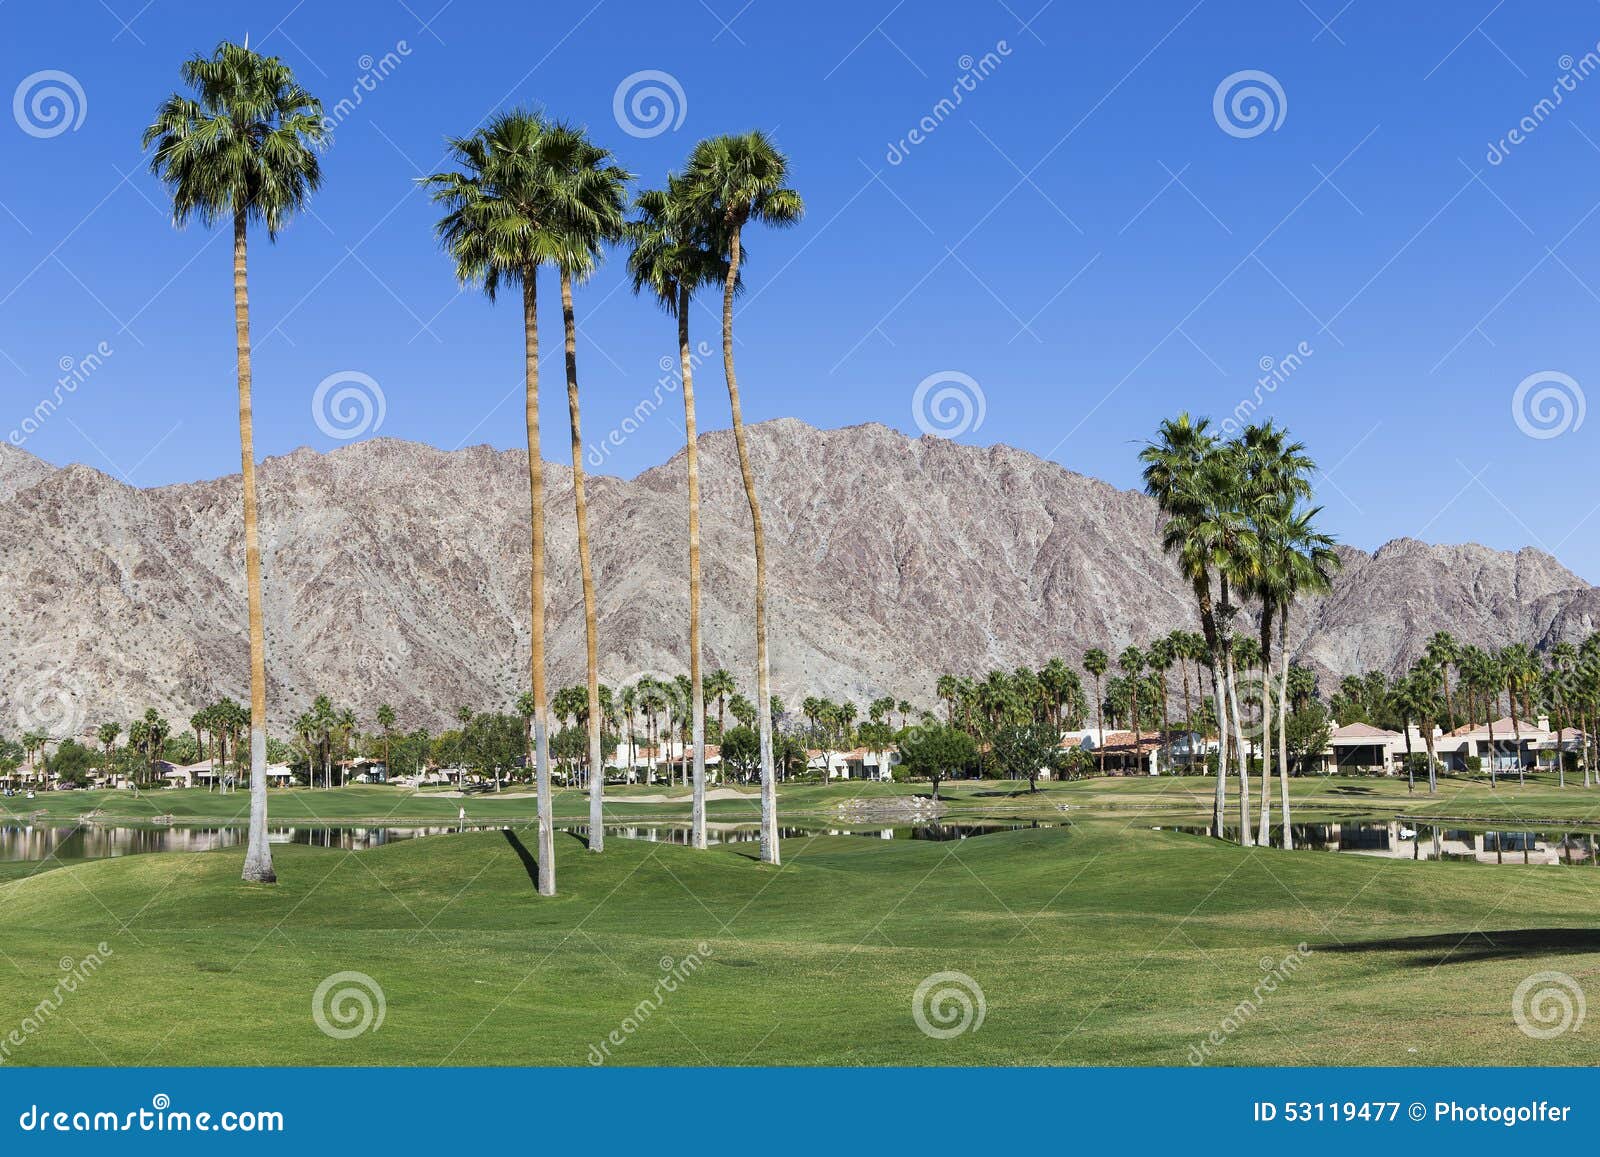 Pga West Golf Course, Palm Springs, California Stock Image - Image of ...